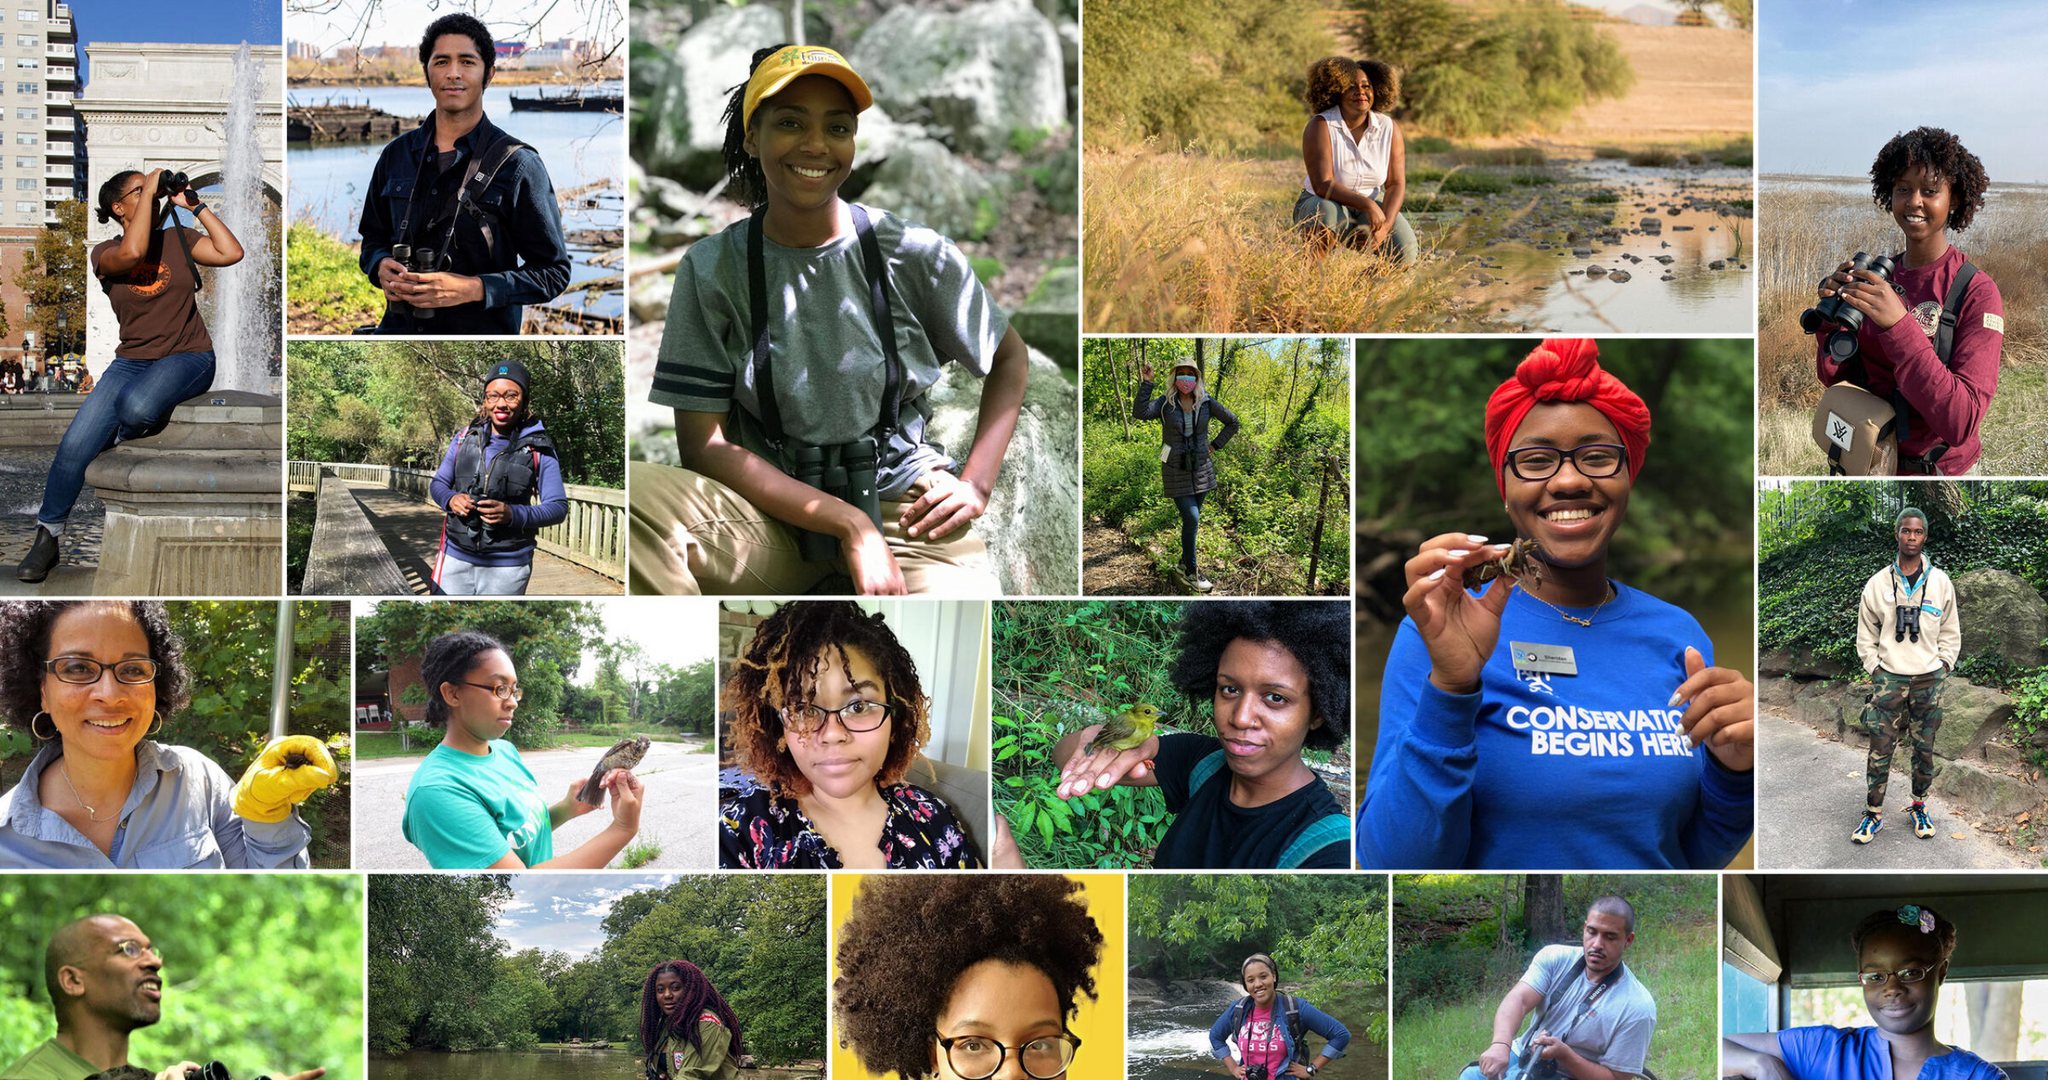 Black Birders Week pushes for more inclusive outdoors